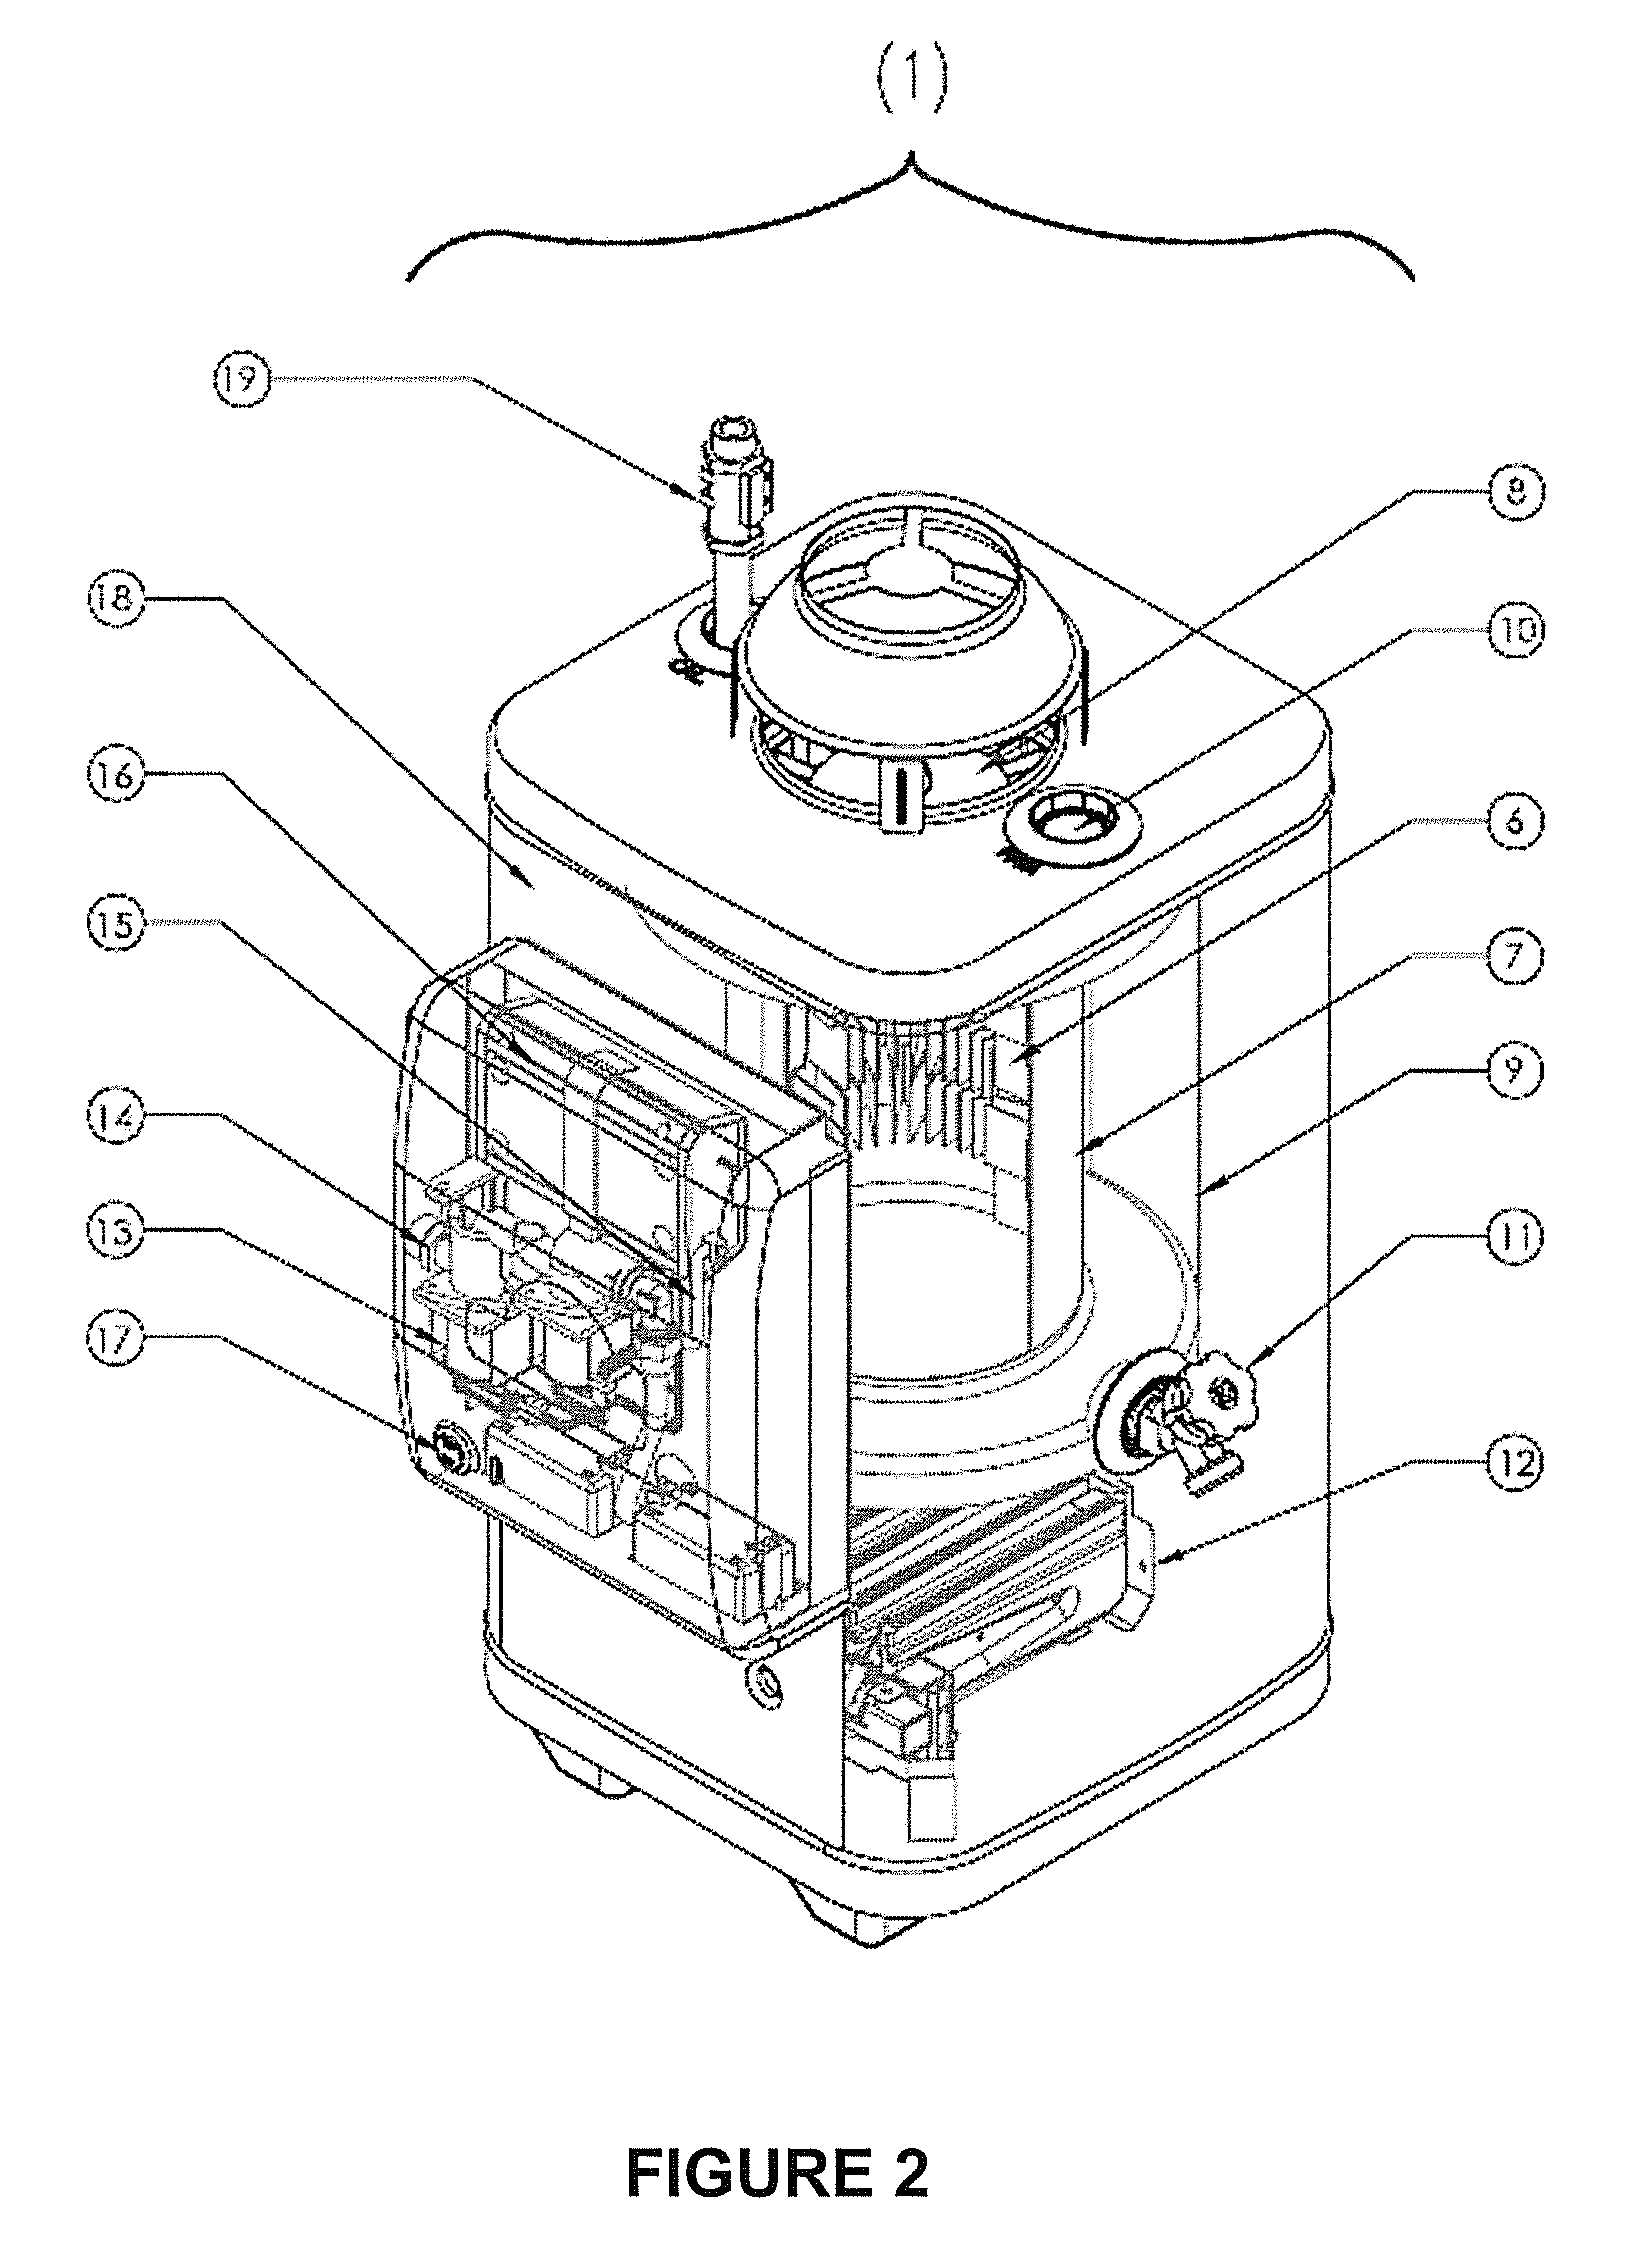 Water heater of endorsement with ionized ignition and electronic control of temperature, for solar heaters of the type thermosiphon